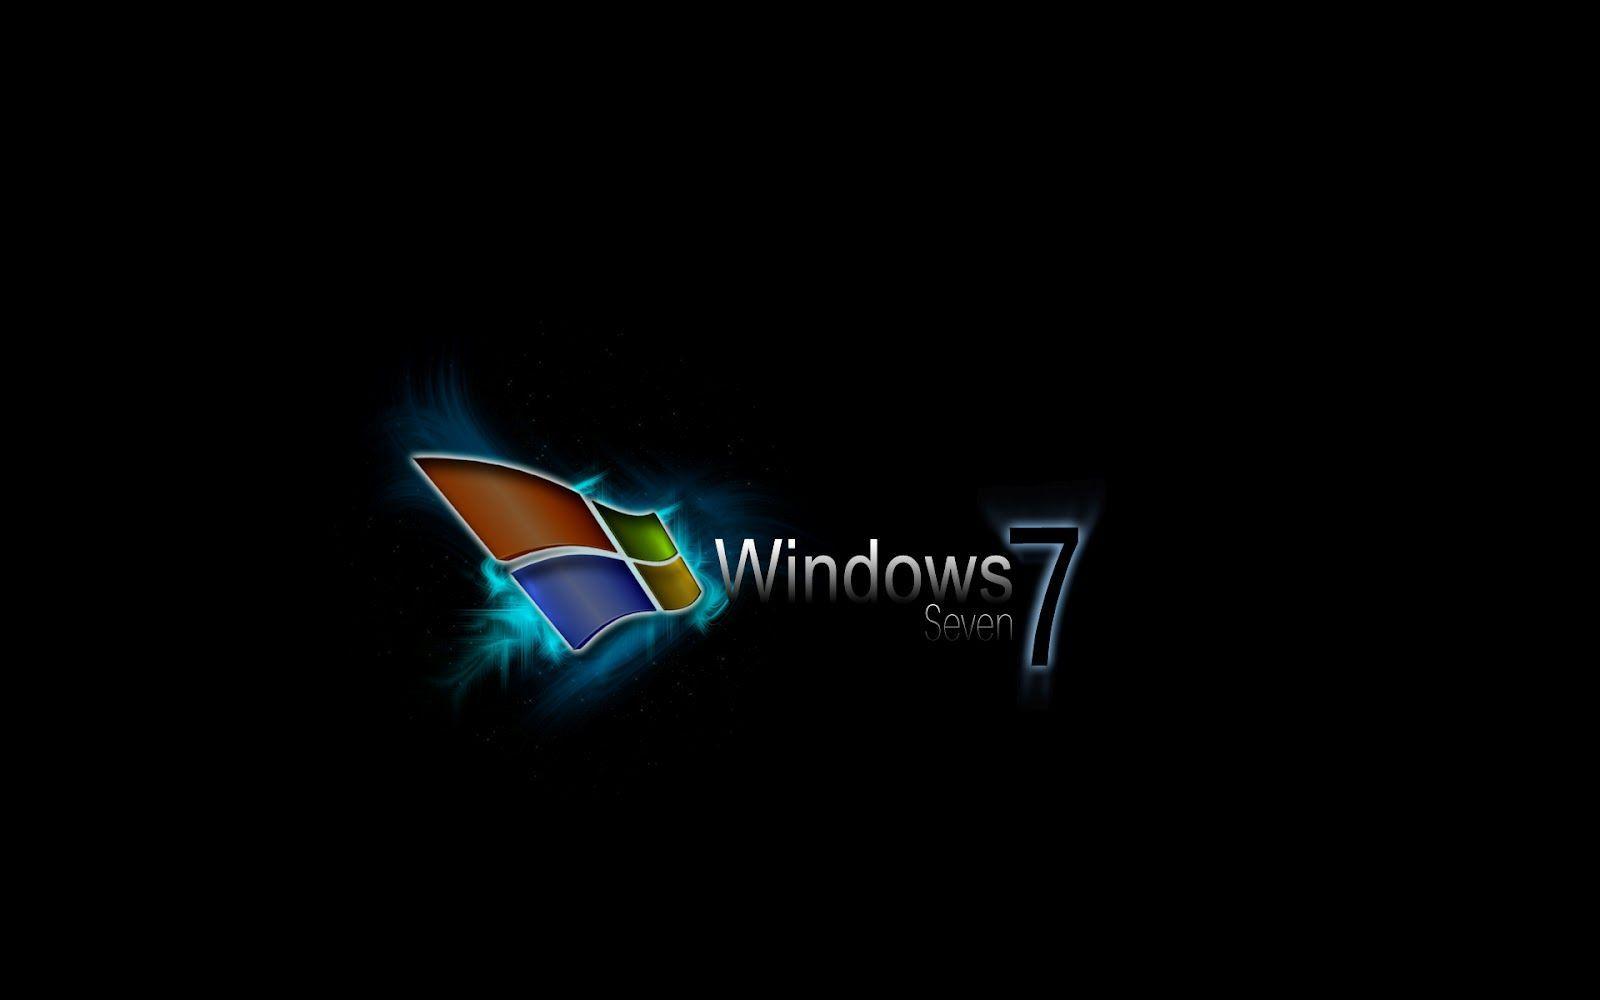 Wallpapers For > Animated Gif Backgrounds Windows 7